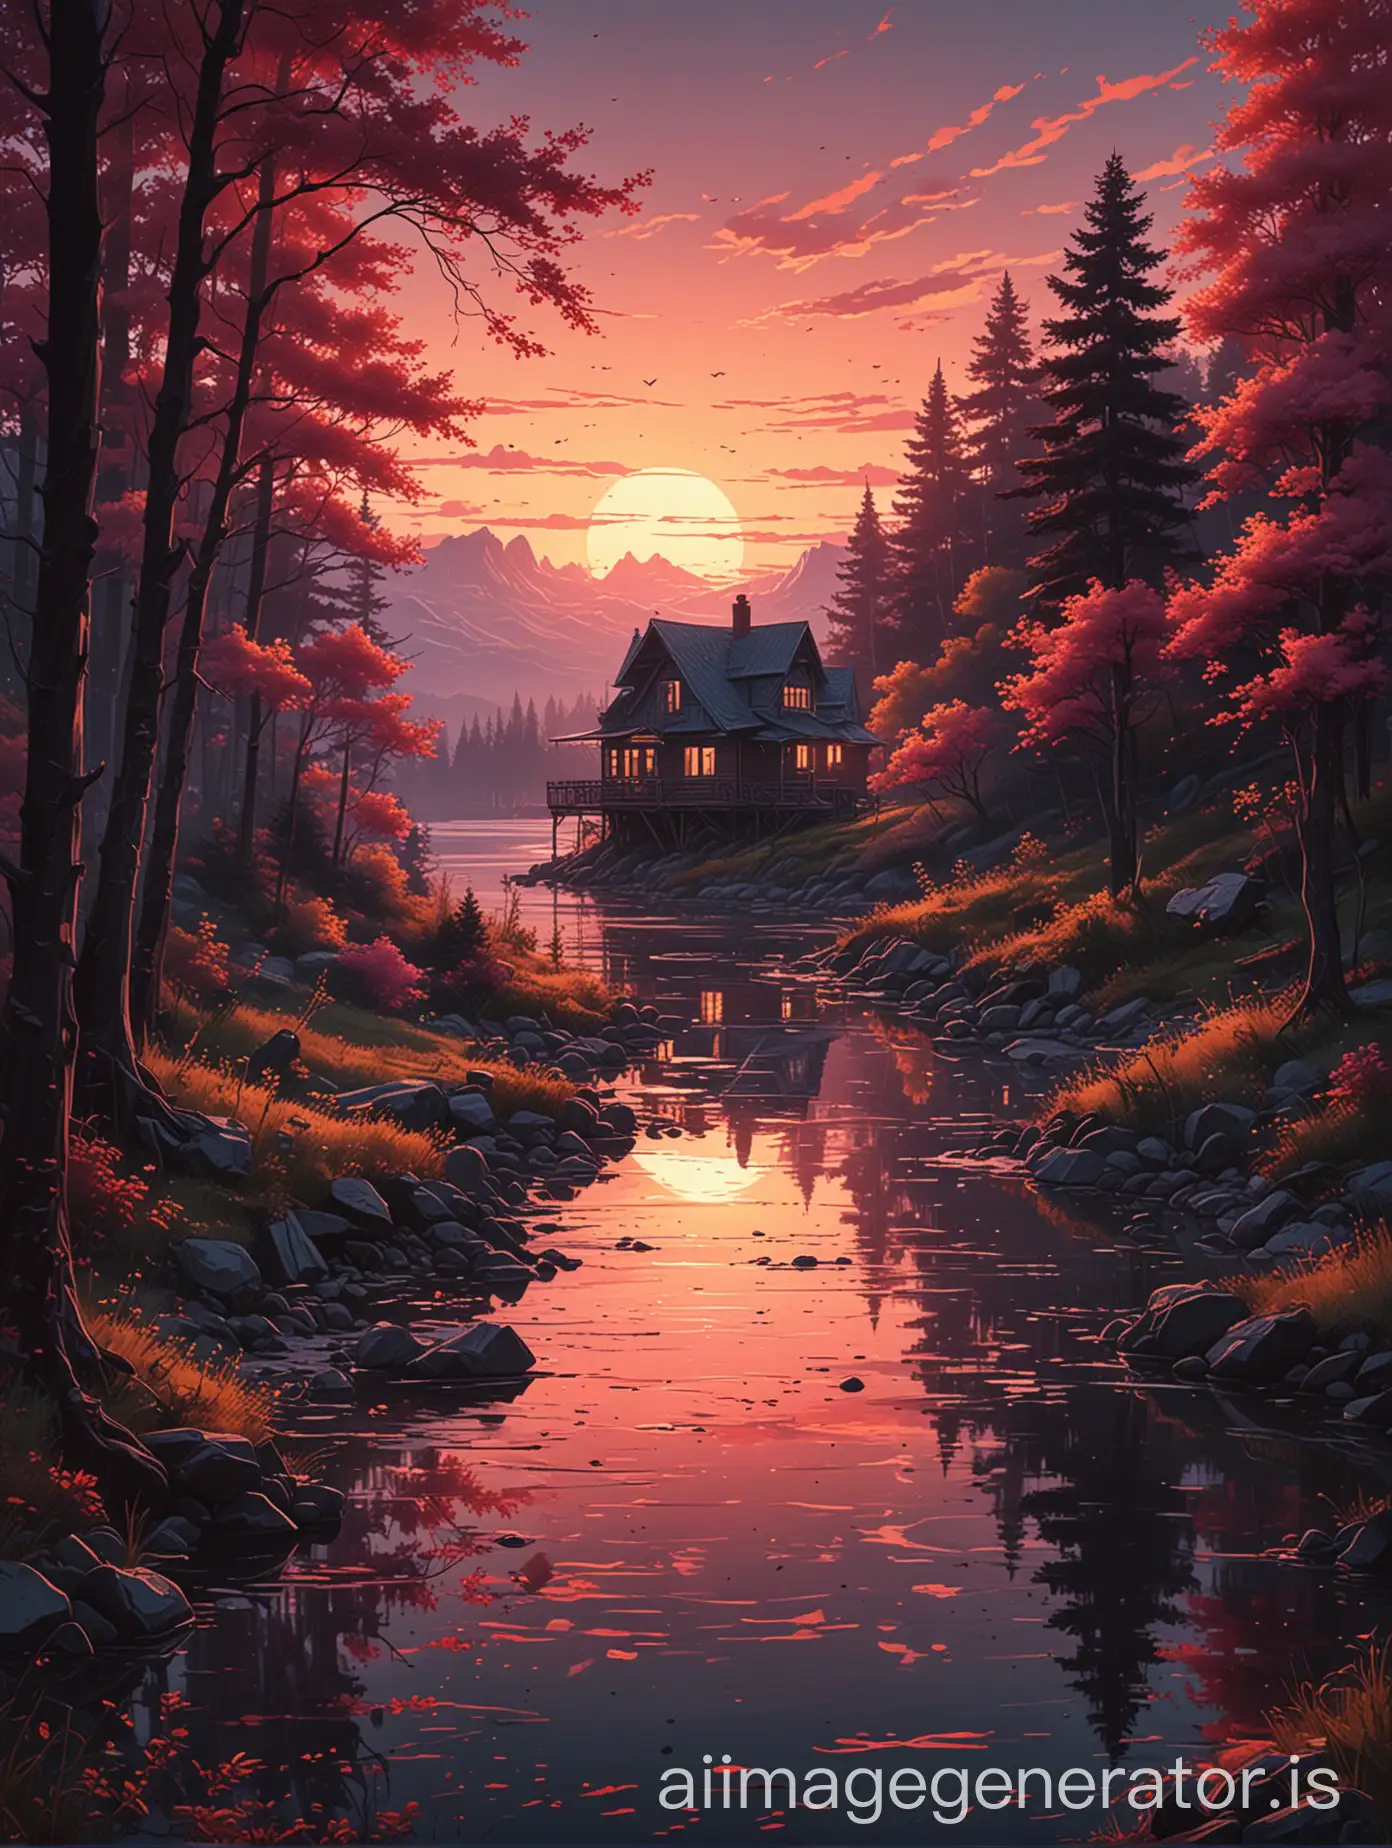 a painting of a sunset with trees and a house in the background, with the, dream scenery art, anato finnstark and alena aenami, art of alena aenami, artistic. alena aenami, alena aenami and android jones, 8k stunning artwork, epic digital art illustration, in the style dan mumford artwork, beautiful digital artwork, beautiful art uhd 4 k, mind-bending digital art, Alena Aenami, painting by dan mumford, by Alena Aenami, breathtaking digital art, makoto shinkai cyril rolando, inspired by Cyril Rolando, inspiring digital art, intricate digital painting, digital artwork 4 k